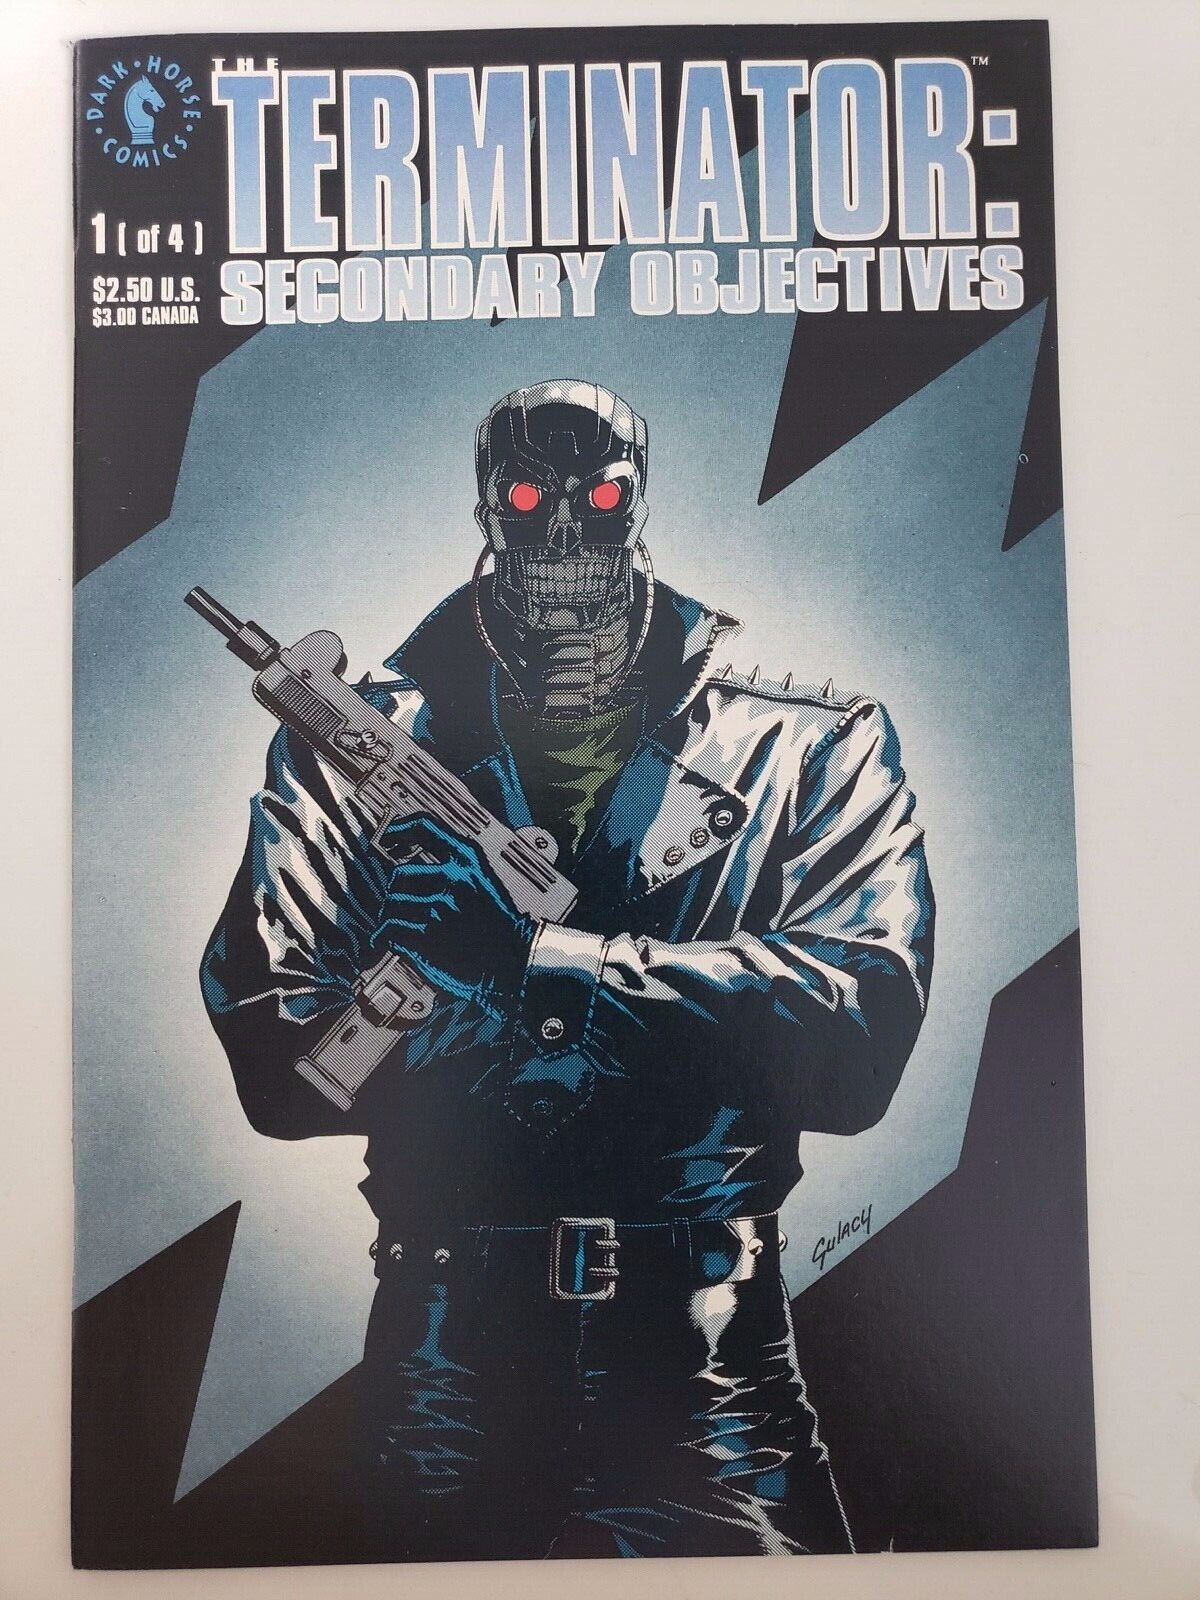 THE TERMINATOR SECONDARY OBJECTIVES #1-4 (1991) DARK HORSE FULL COMPLETE SERIES